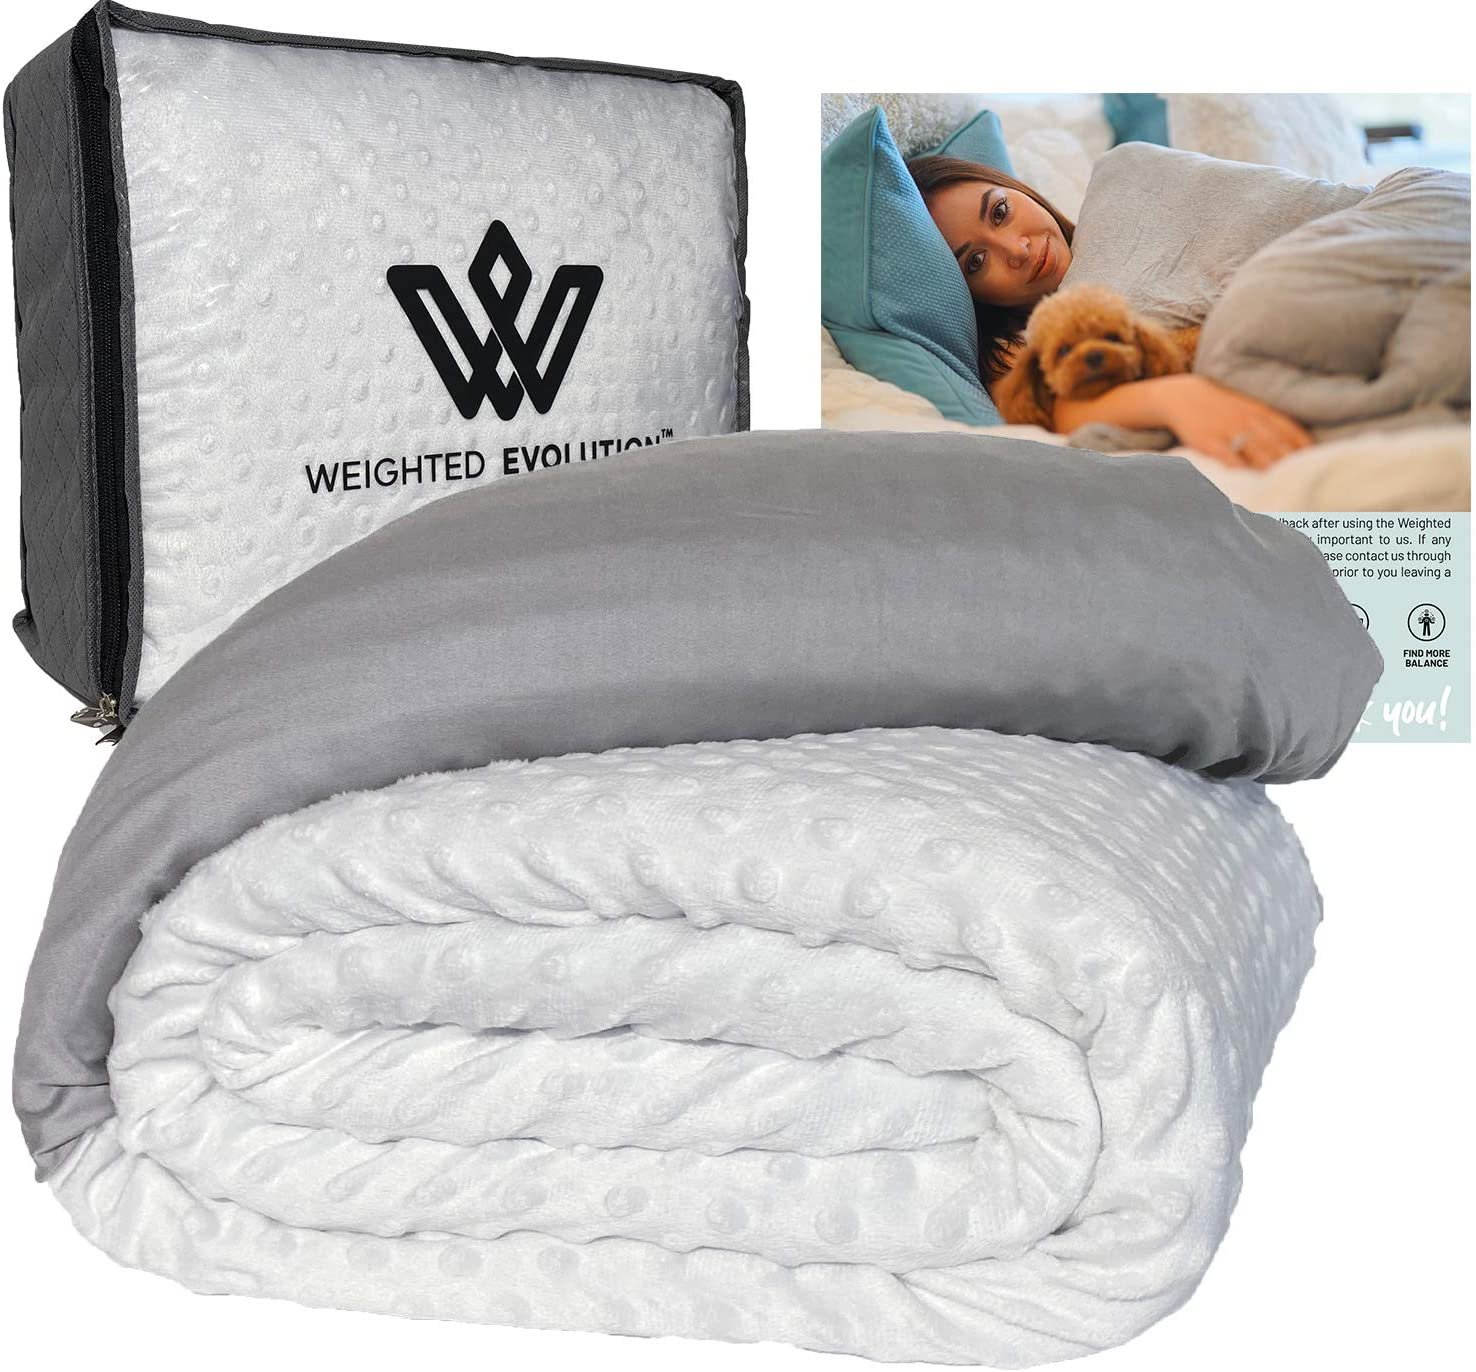 Weighted Blanket - Weighted blankets can help promote relaxation and provide weighted stimulation for a calming experience.